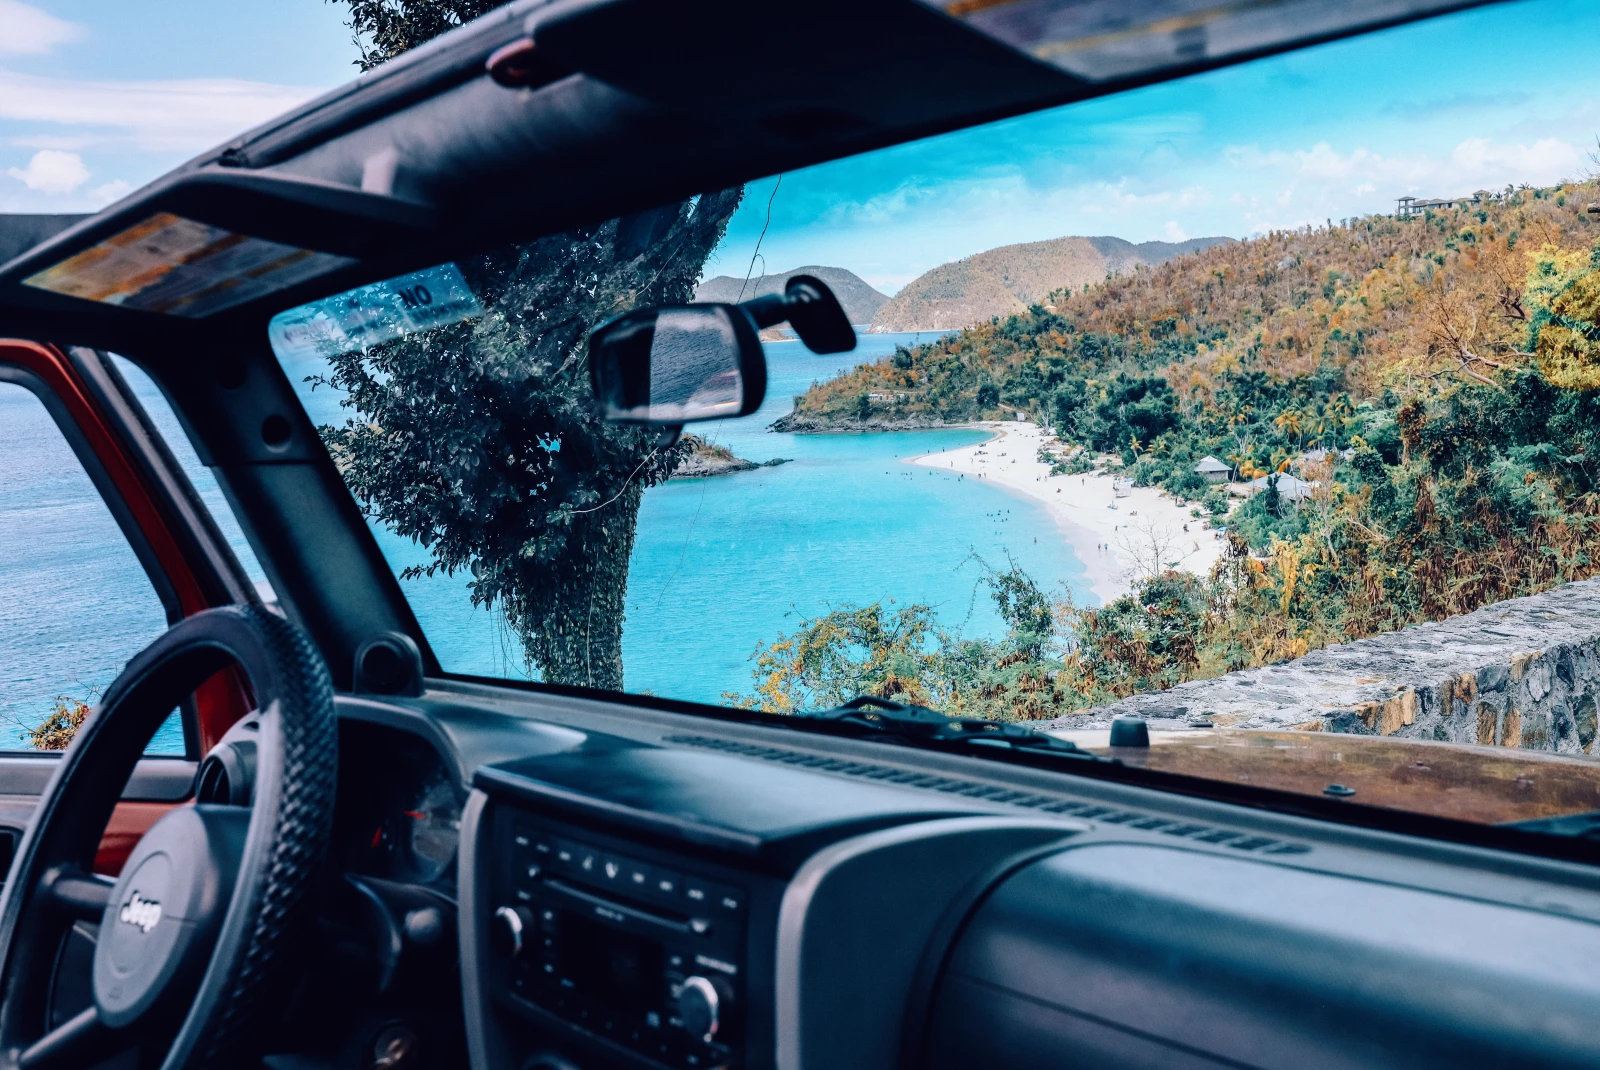 View of blue waters and the beach in St. John out the window of a black jeep